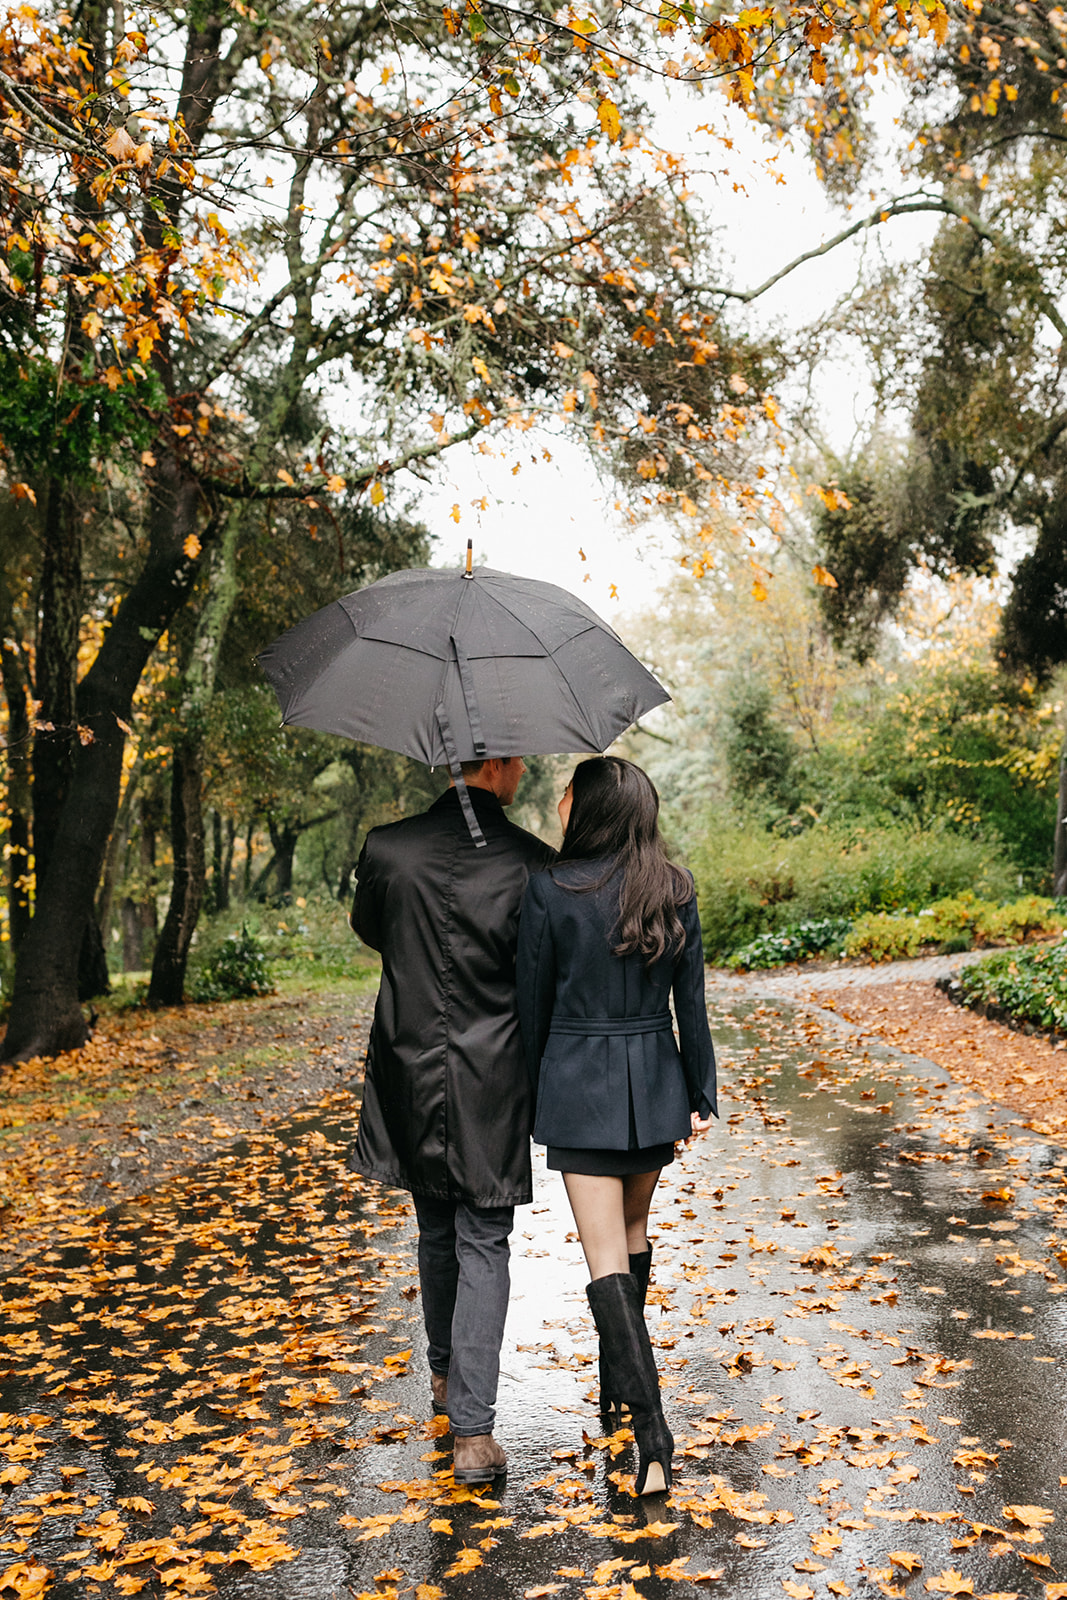 walking together under an umbrella for engagement session photos at the madrona